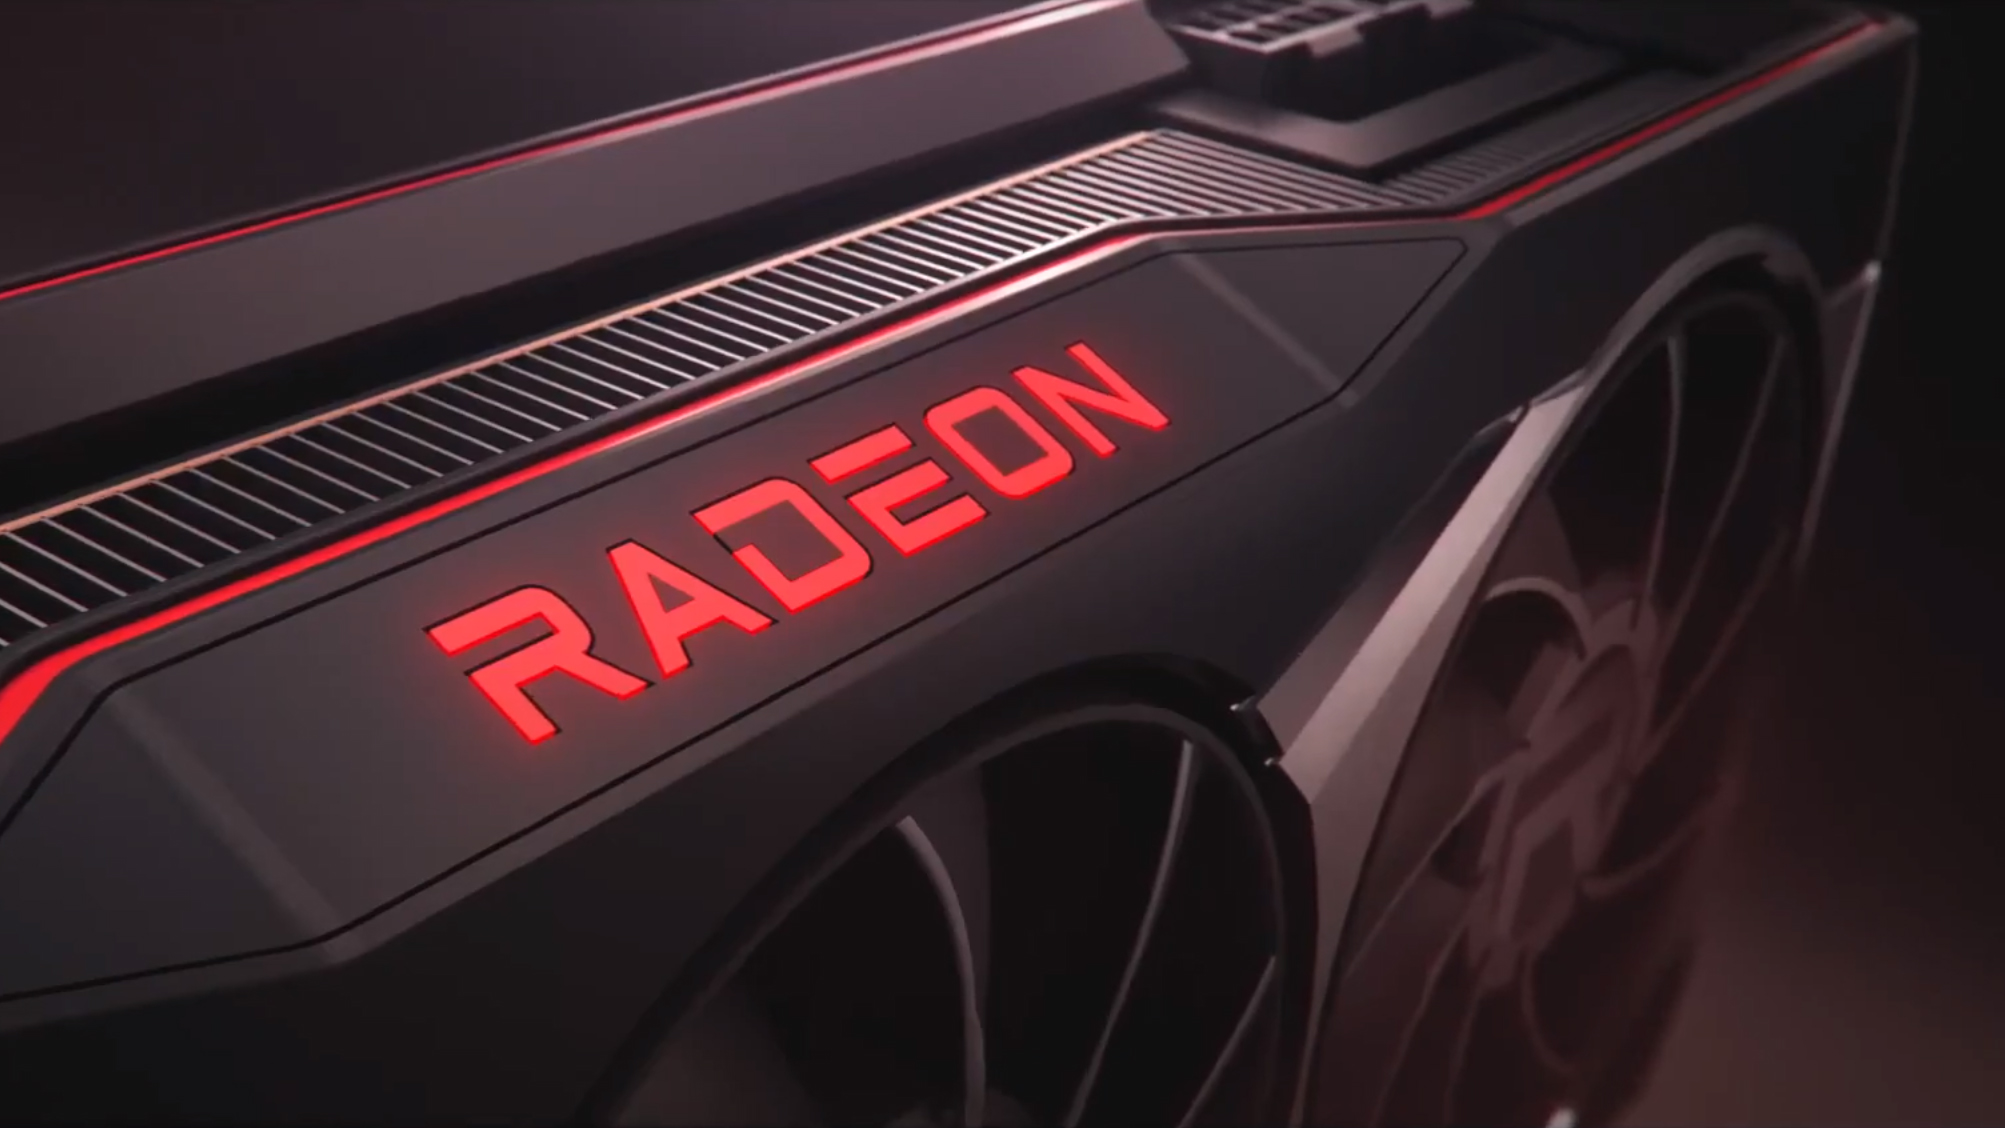 Amd Could Turbocharge Rx 6000 Gpus With Faster Memory